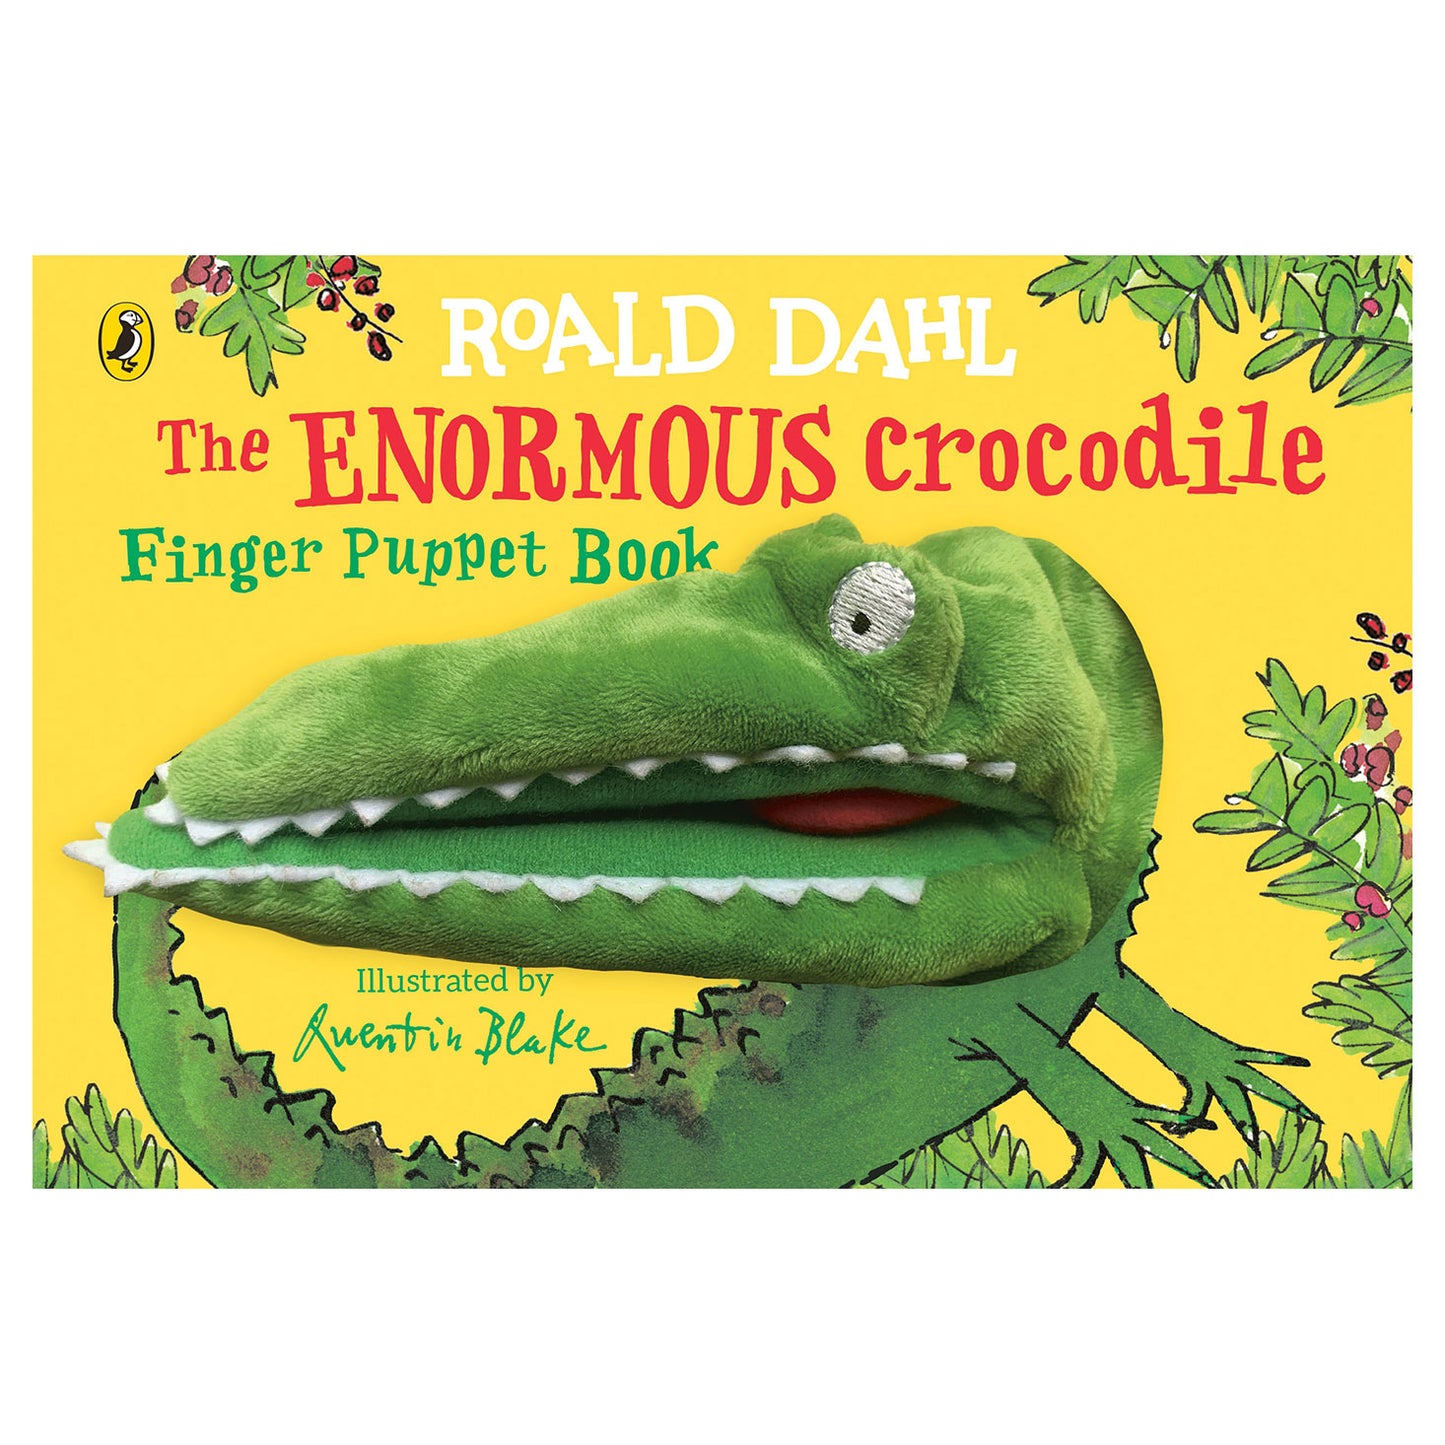 The Enormous Crocodile Finger Puppet Book by Roald Dahl with illustrations by Quentin Blake